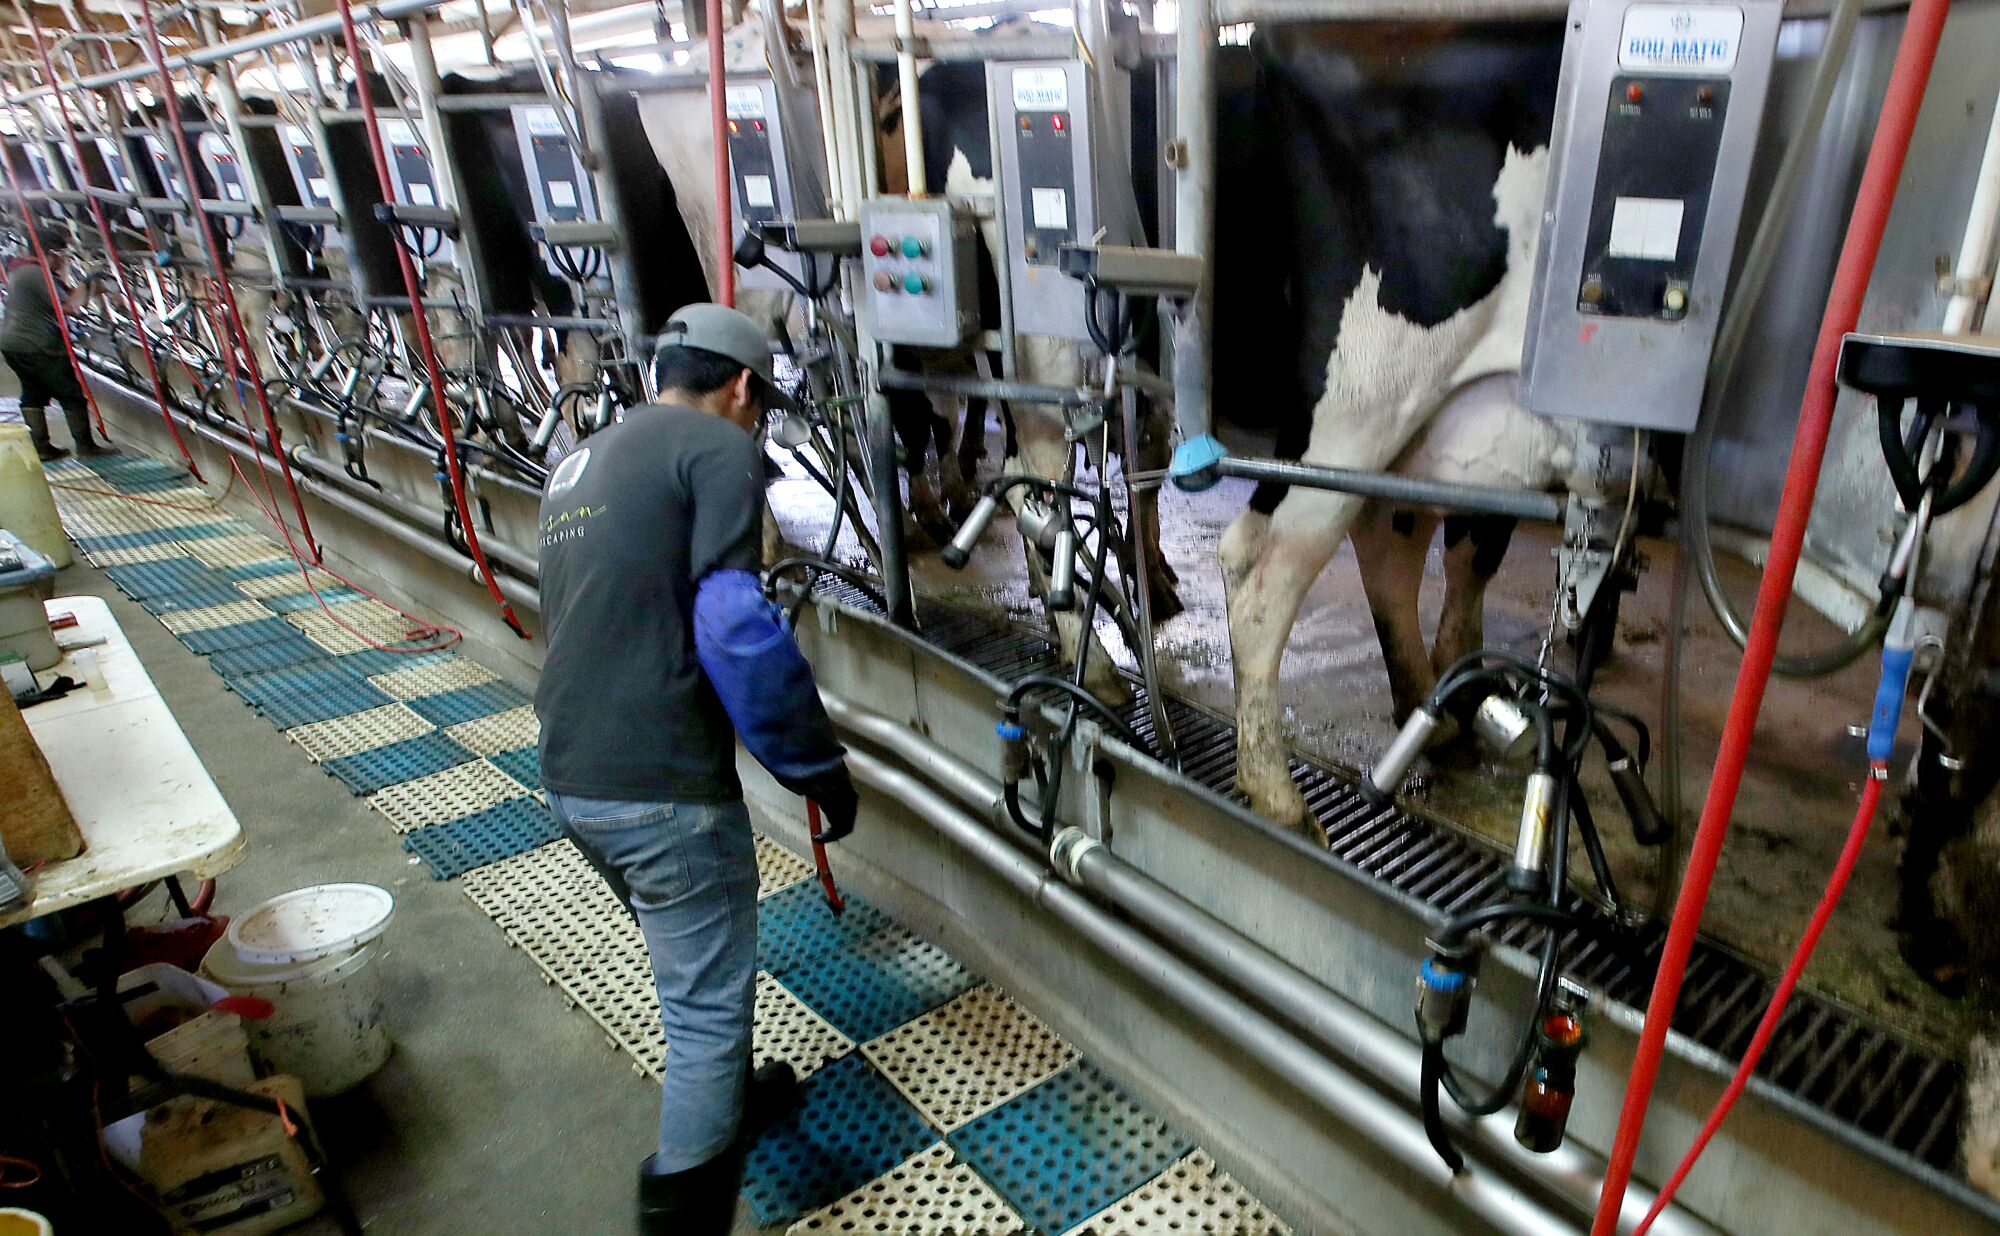 Cows are milked by machines while a man looks at one of the devices.